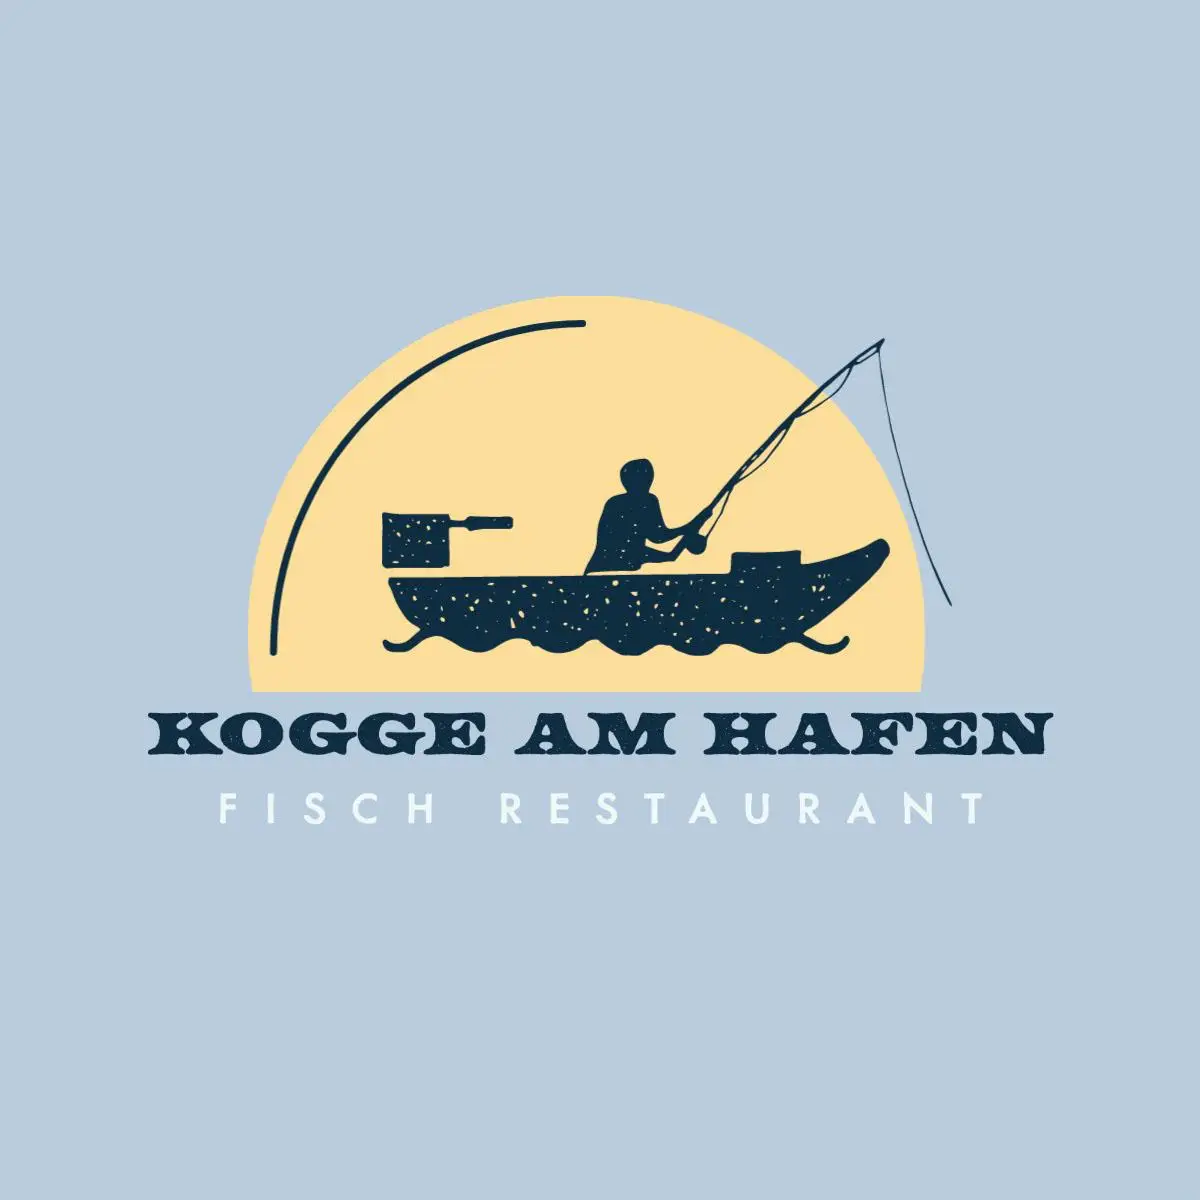 Blue and Yellow Illustrated Seafood Restaurant Logo with Man Fishing in Boat